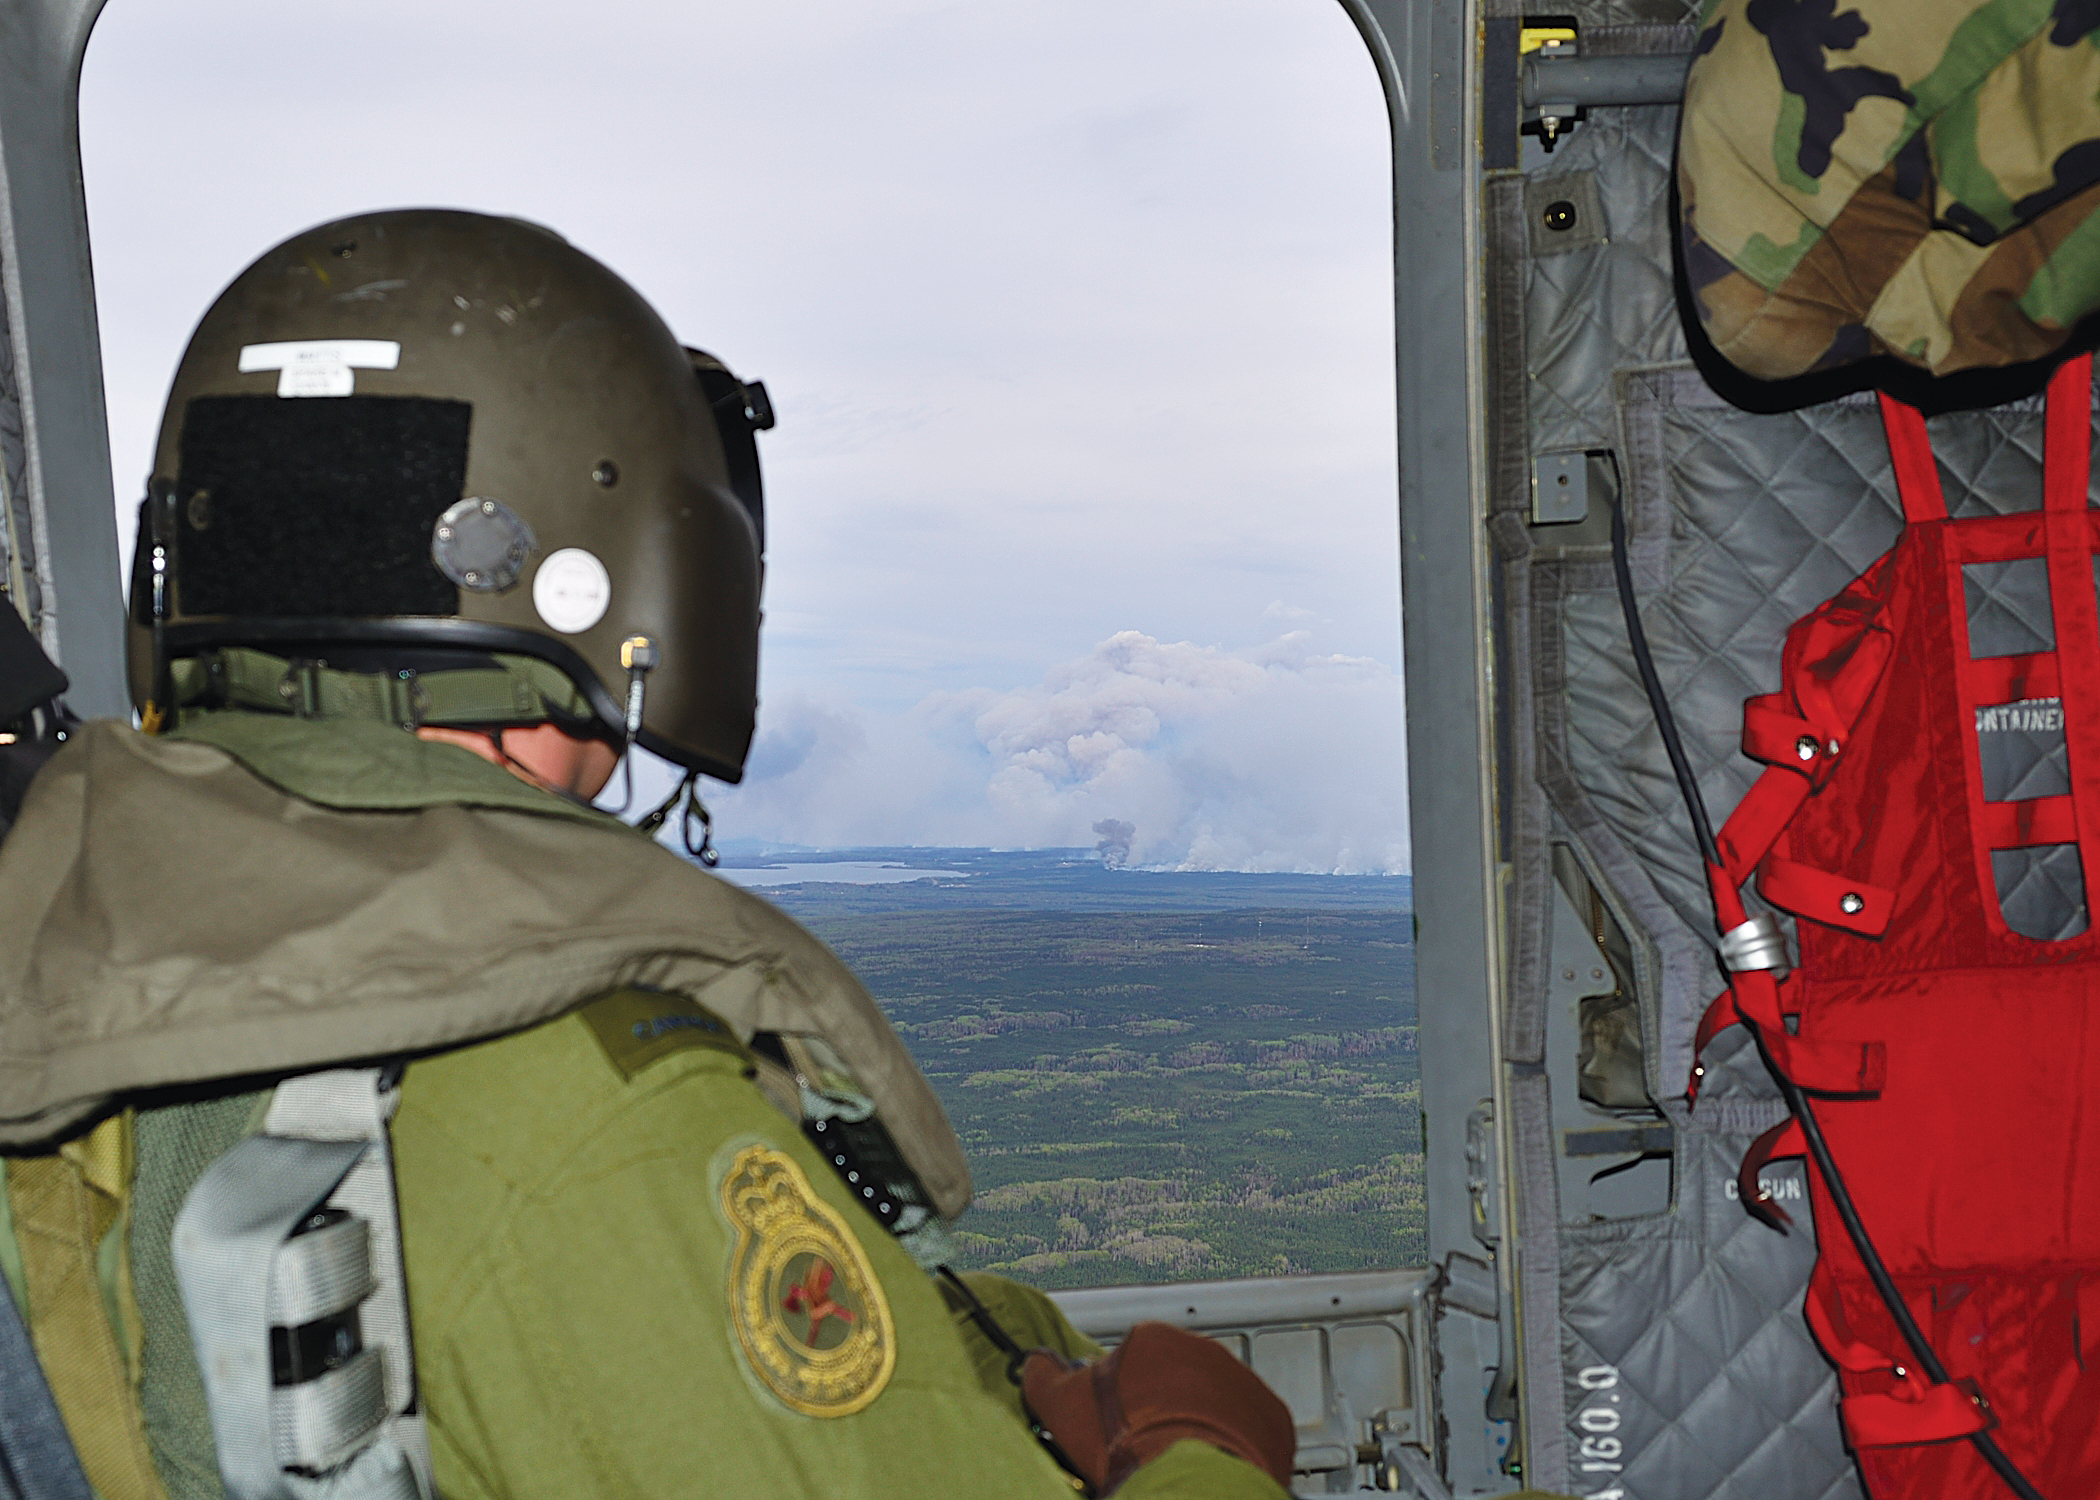 ENGLISH/ANGLAIS WA2016-0019-02 Corporal Greg Watts, Flight Engineer, observes wildfires near Fort McMurray from a CH-147F Chinook helicopter during the Canadian Armed Forces’ support to the Province of Alberta’s emergency response efforts. Photo by: MCpl Brandon O'Connell, 3 CDN DIV PA Copyright Notice © 2016 DND-MDN Canada